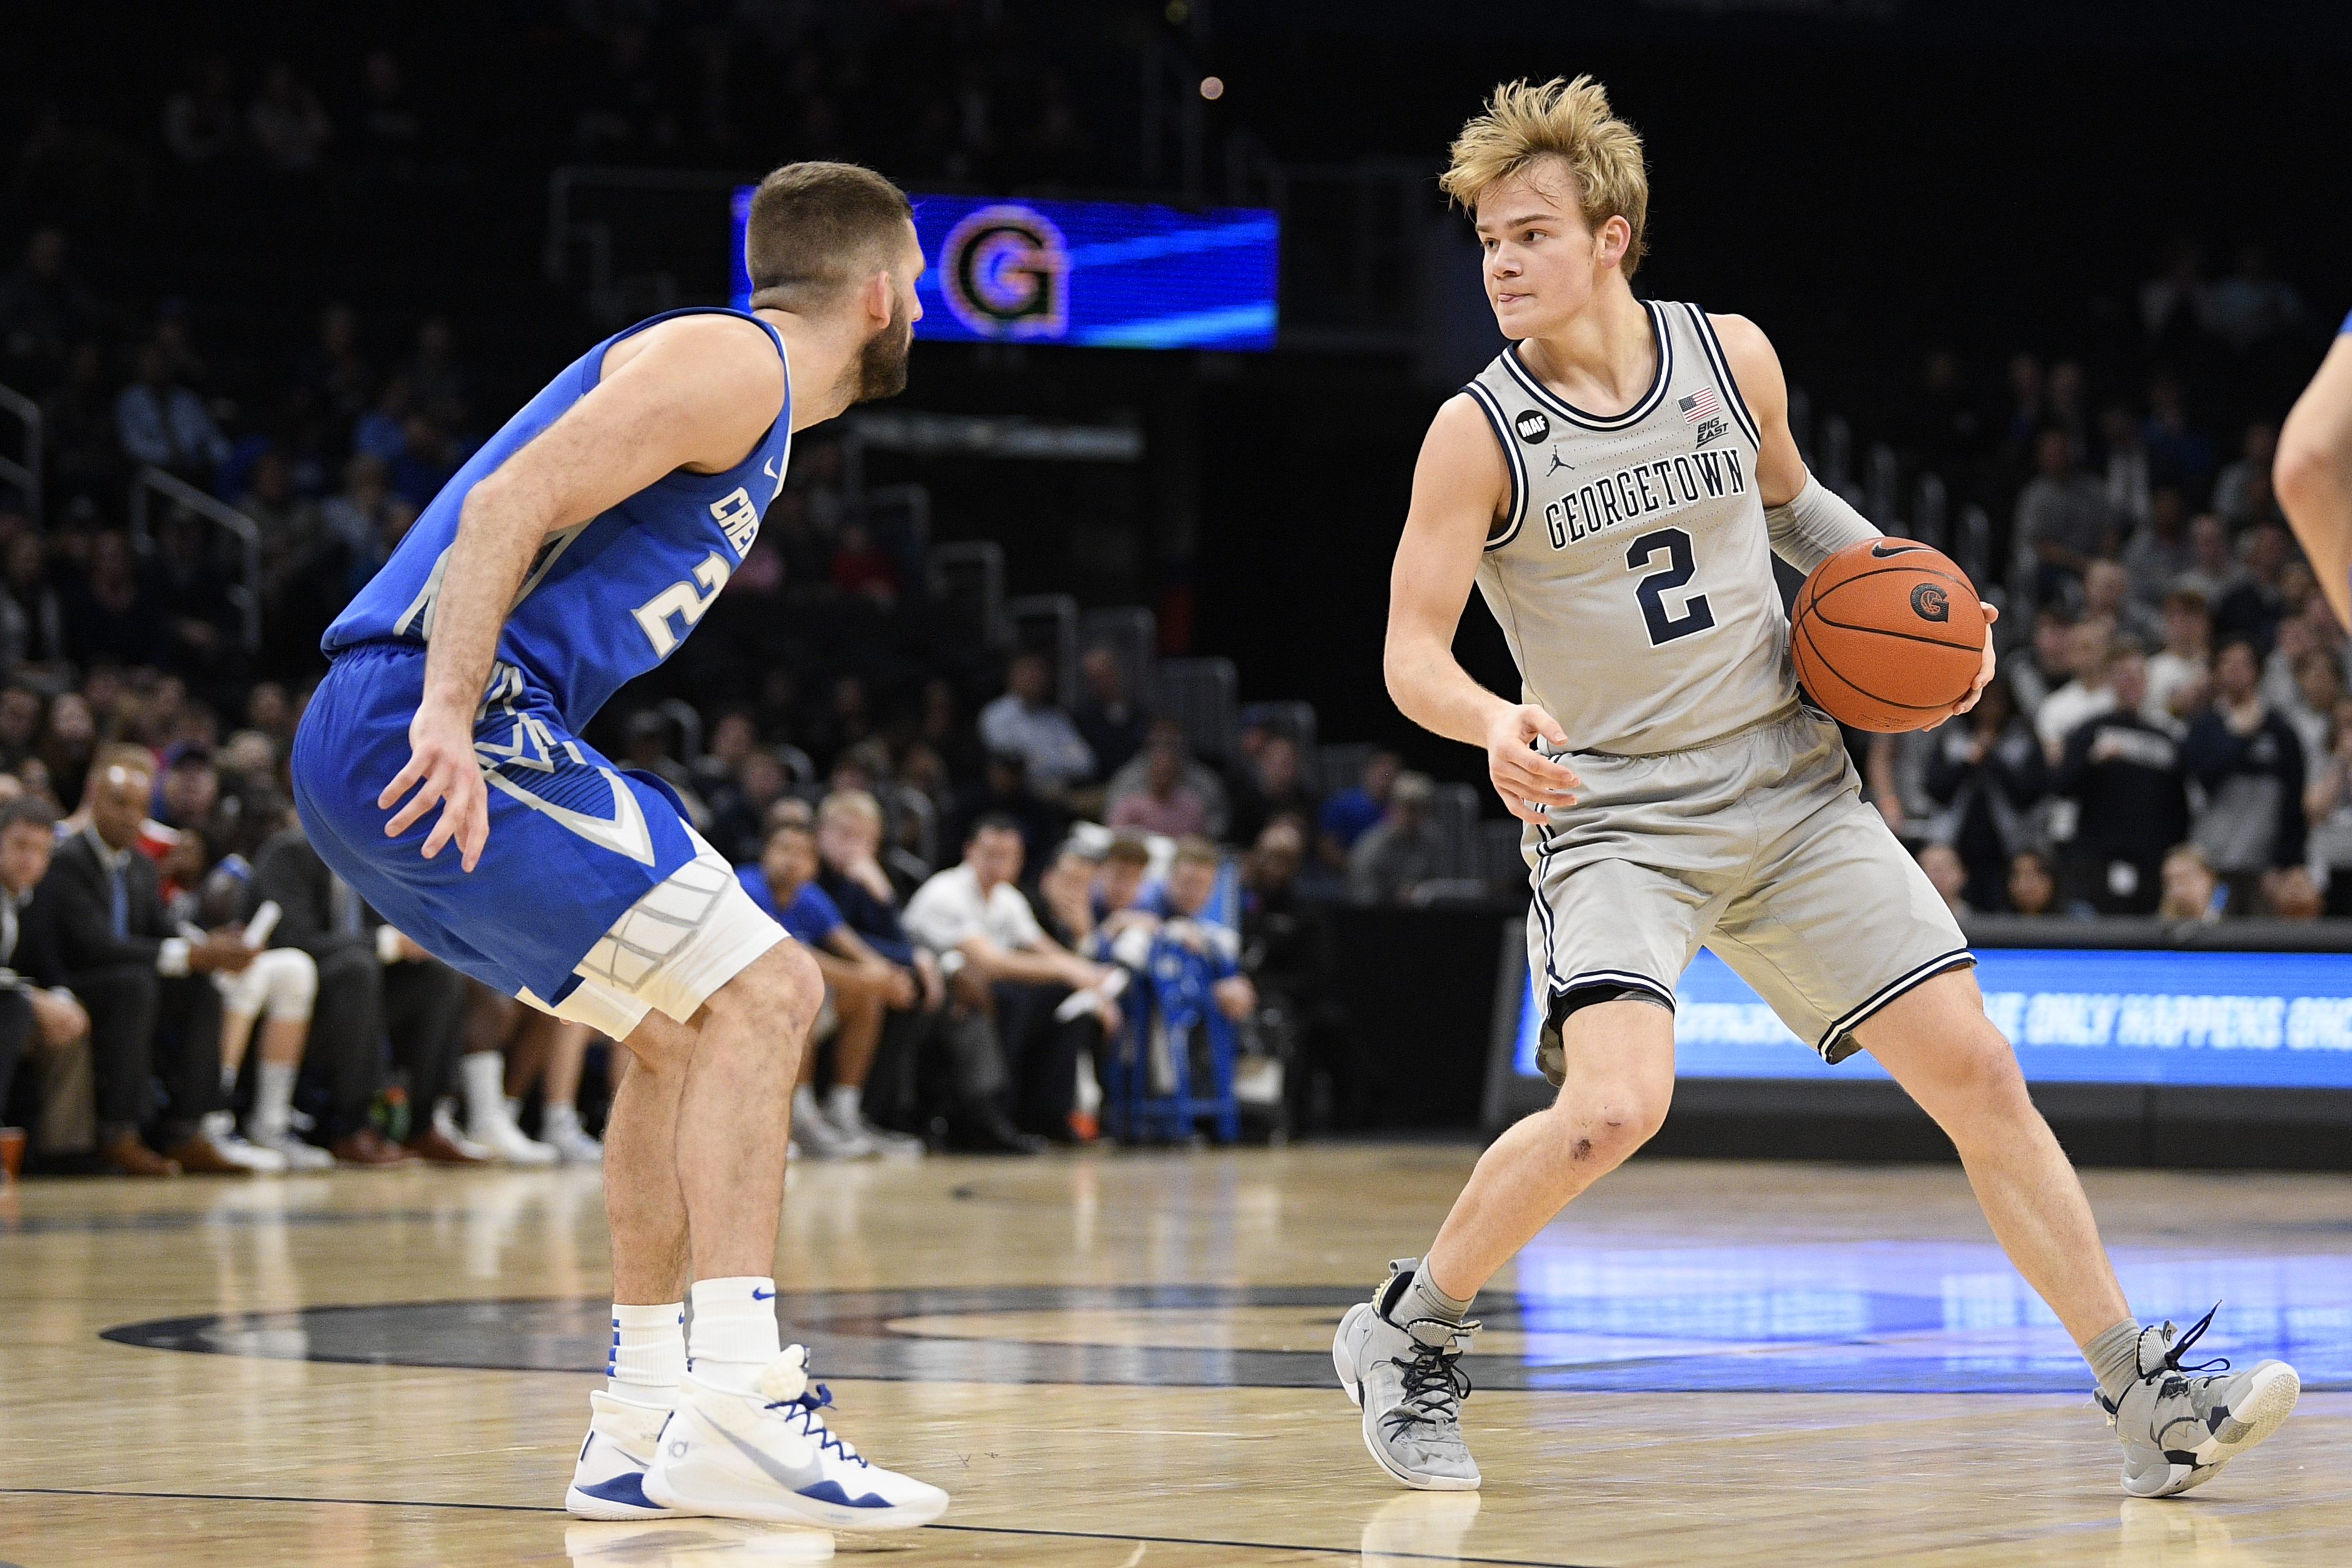 Mac Mcclung Leaves Georgetown For Texas Tech